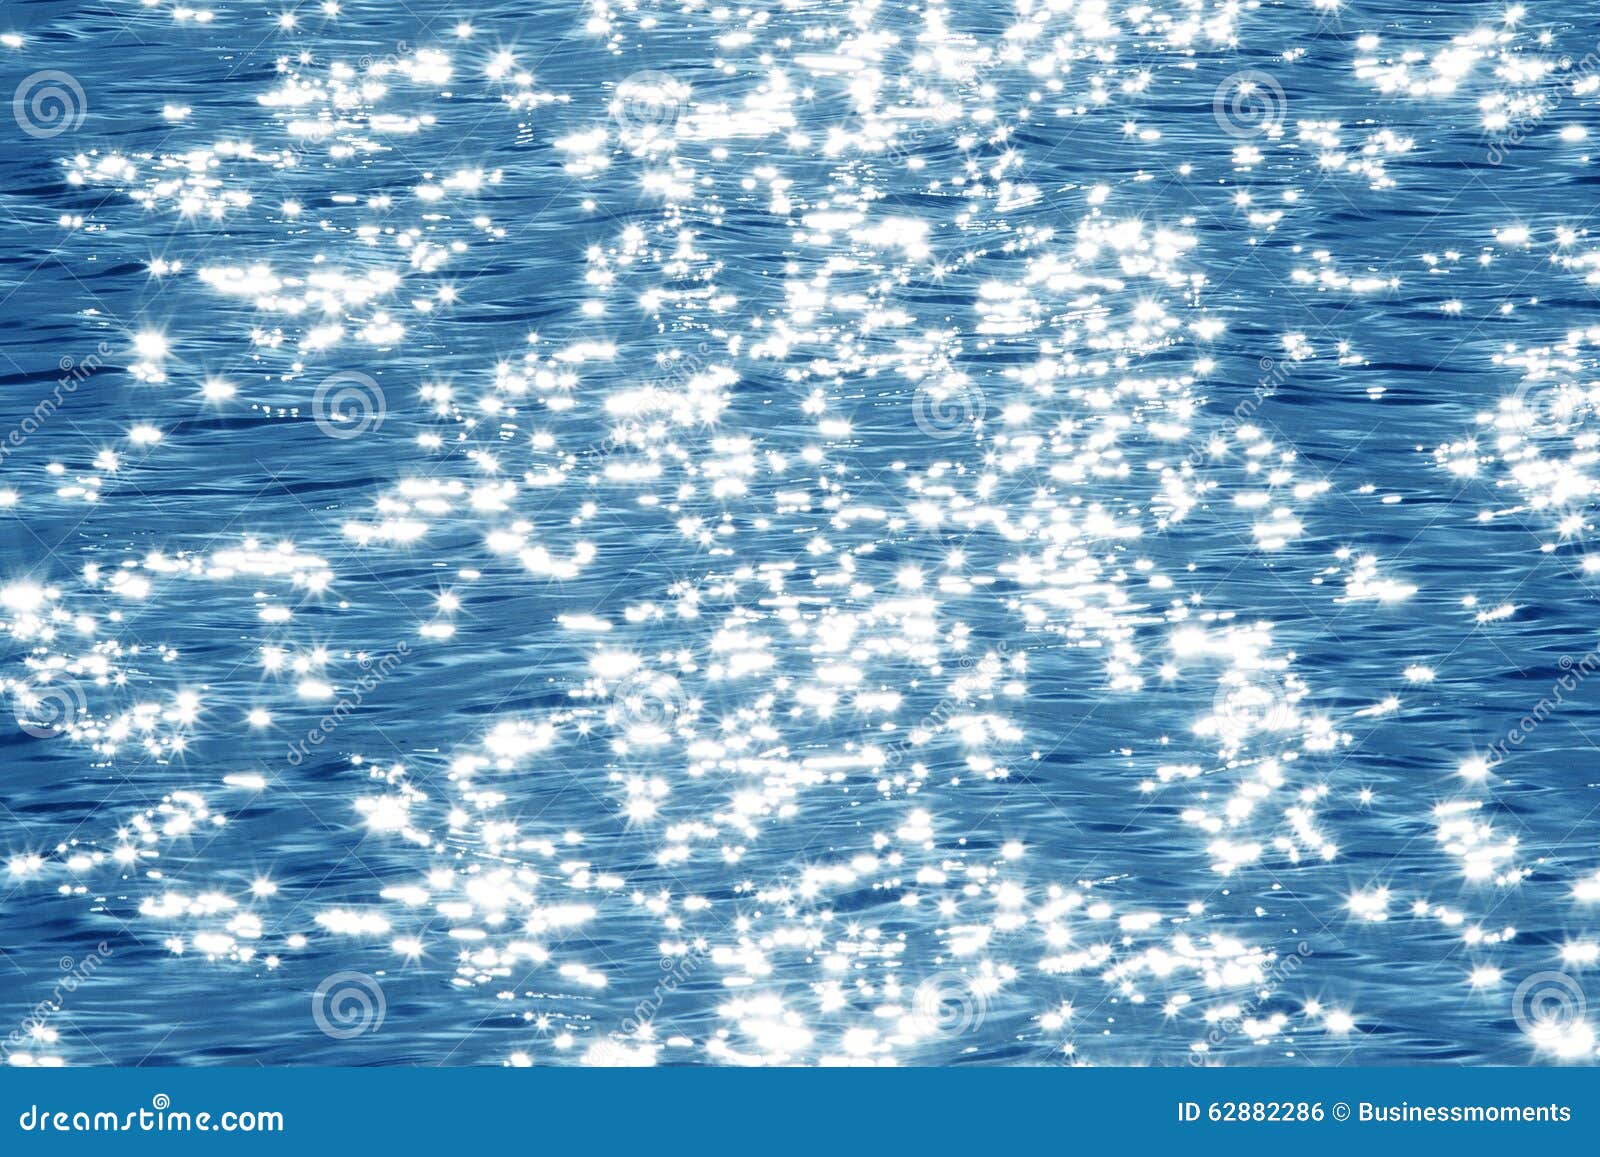 https://thumbs.dreamstime.com/z/blue-water-sparkling-sunlight-reflection-water-bright-sunny-day-twinkel-62882286.jpg